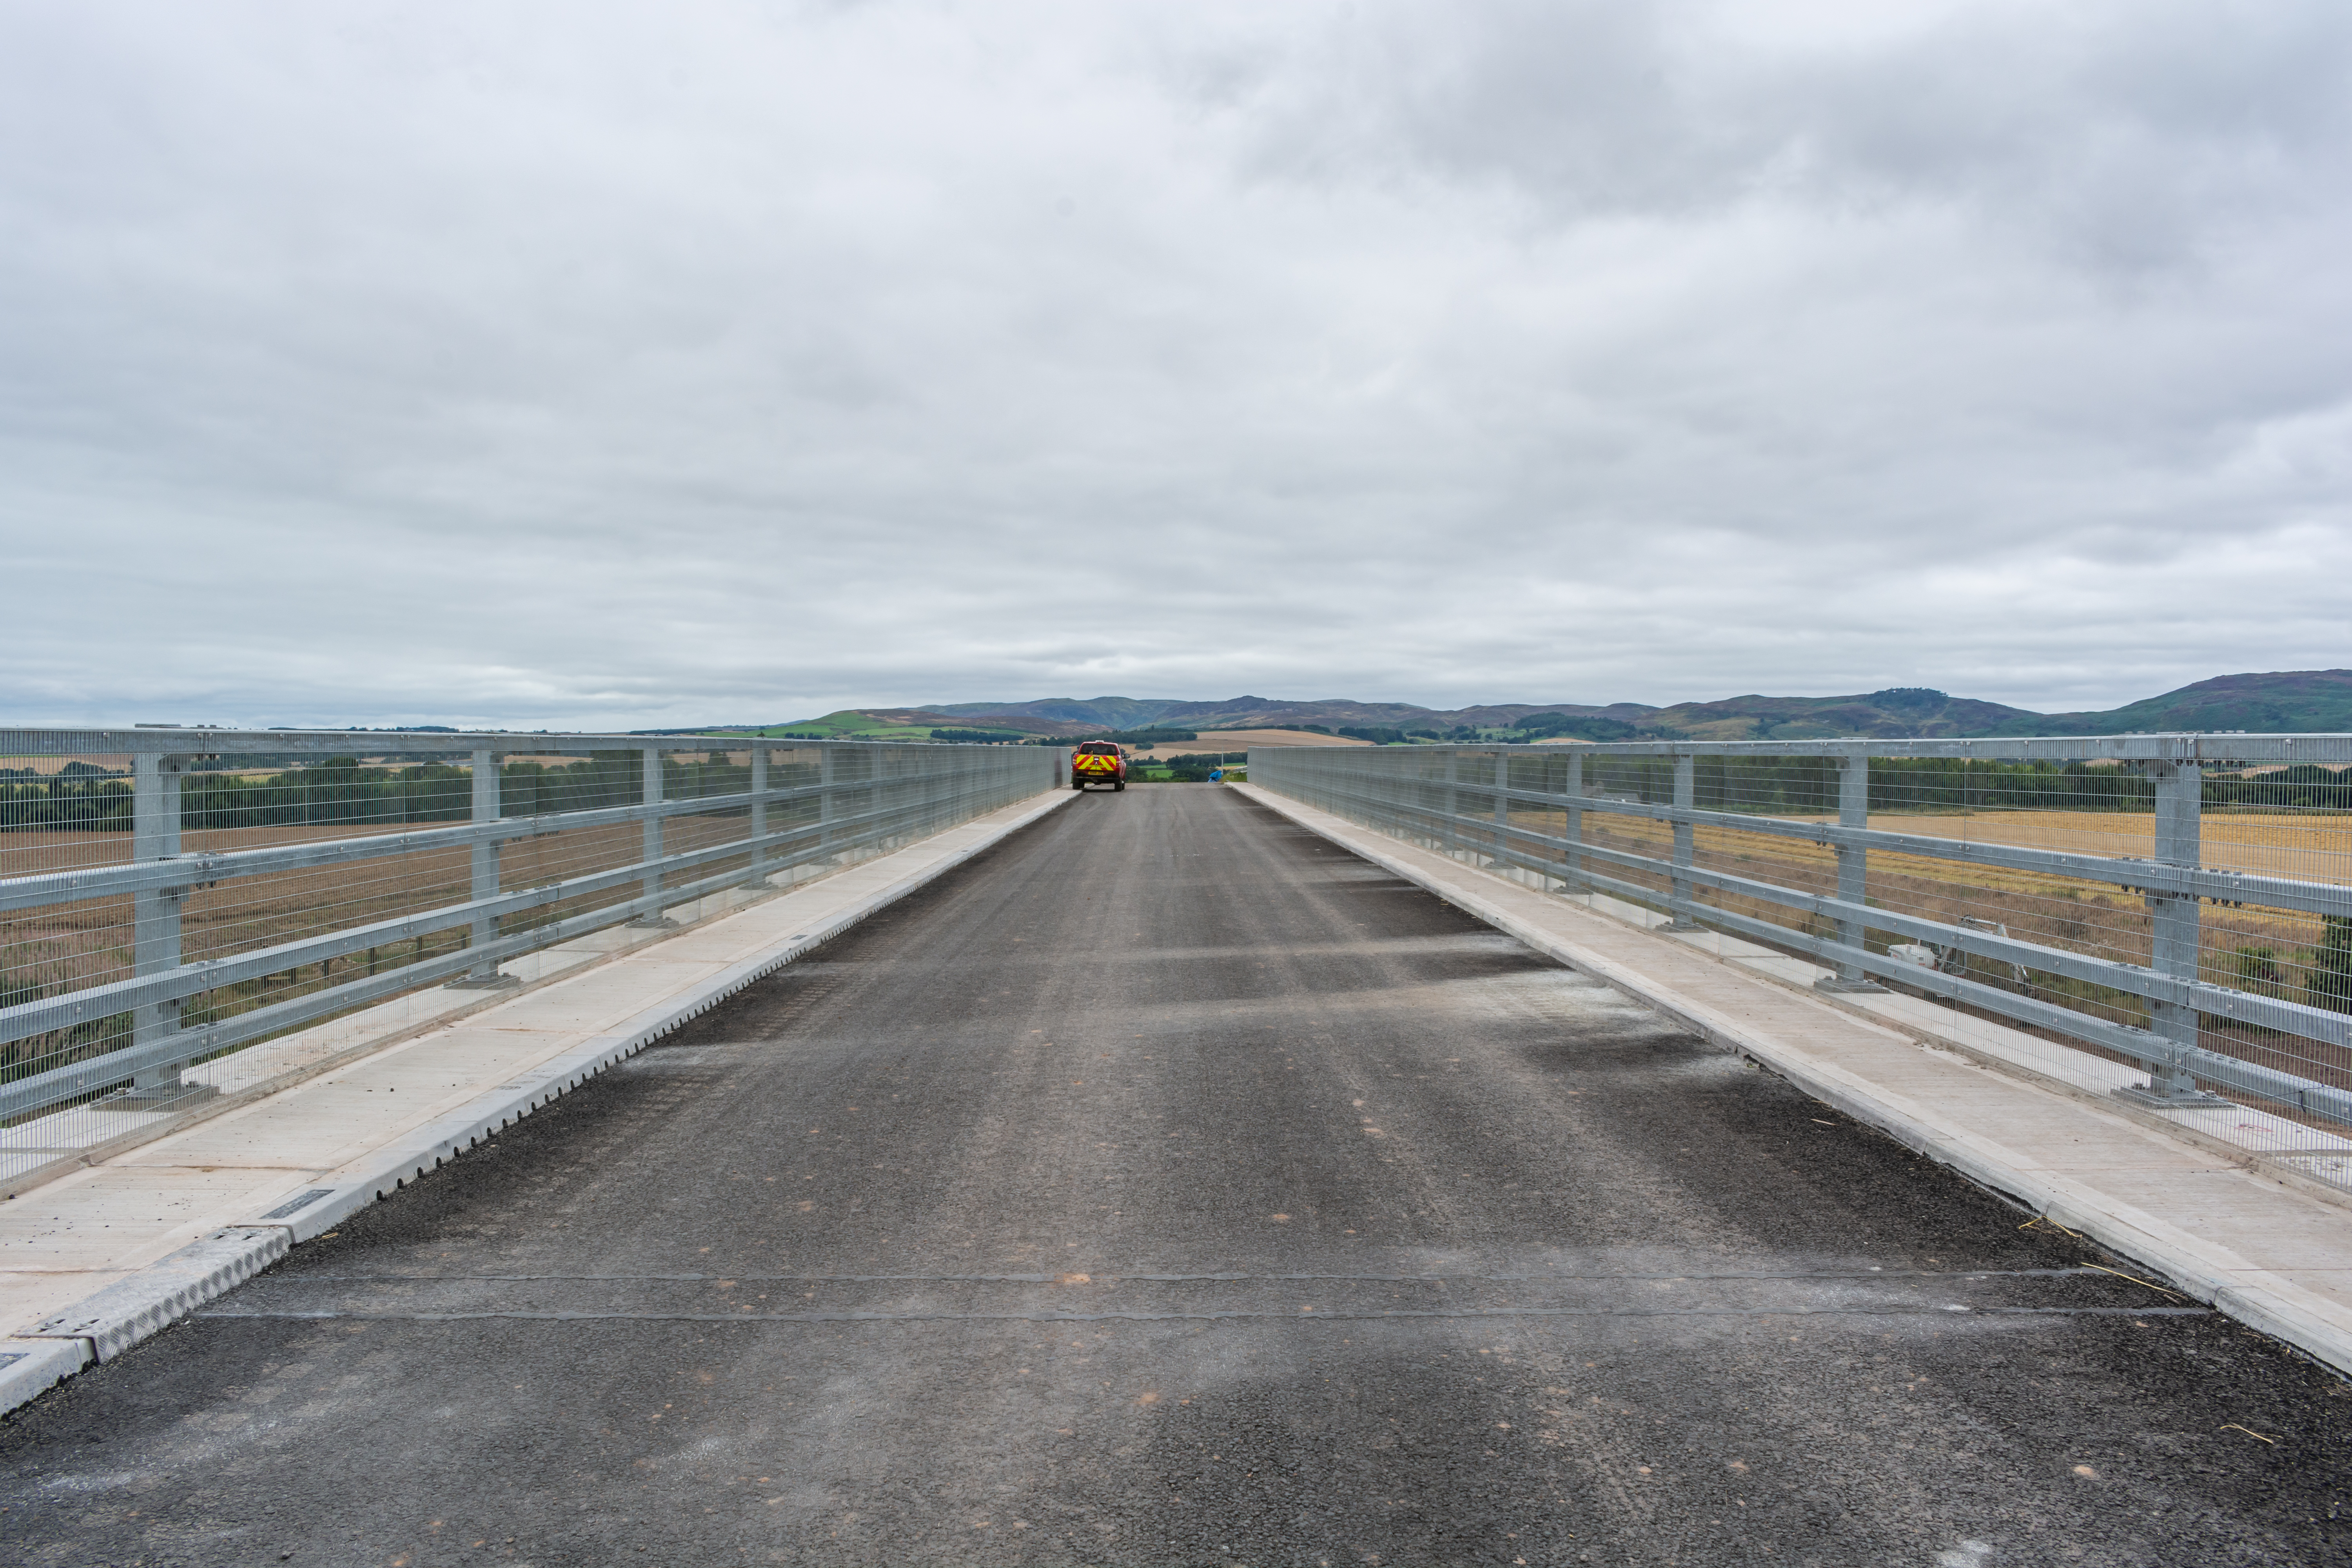 Surfacing of Coltrannie Overbridge